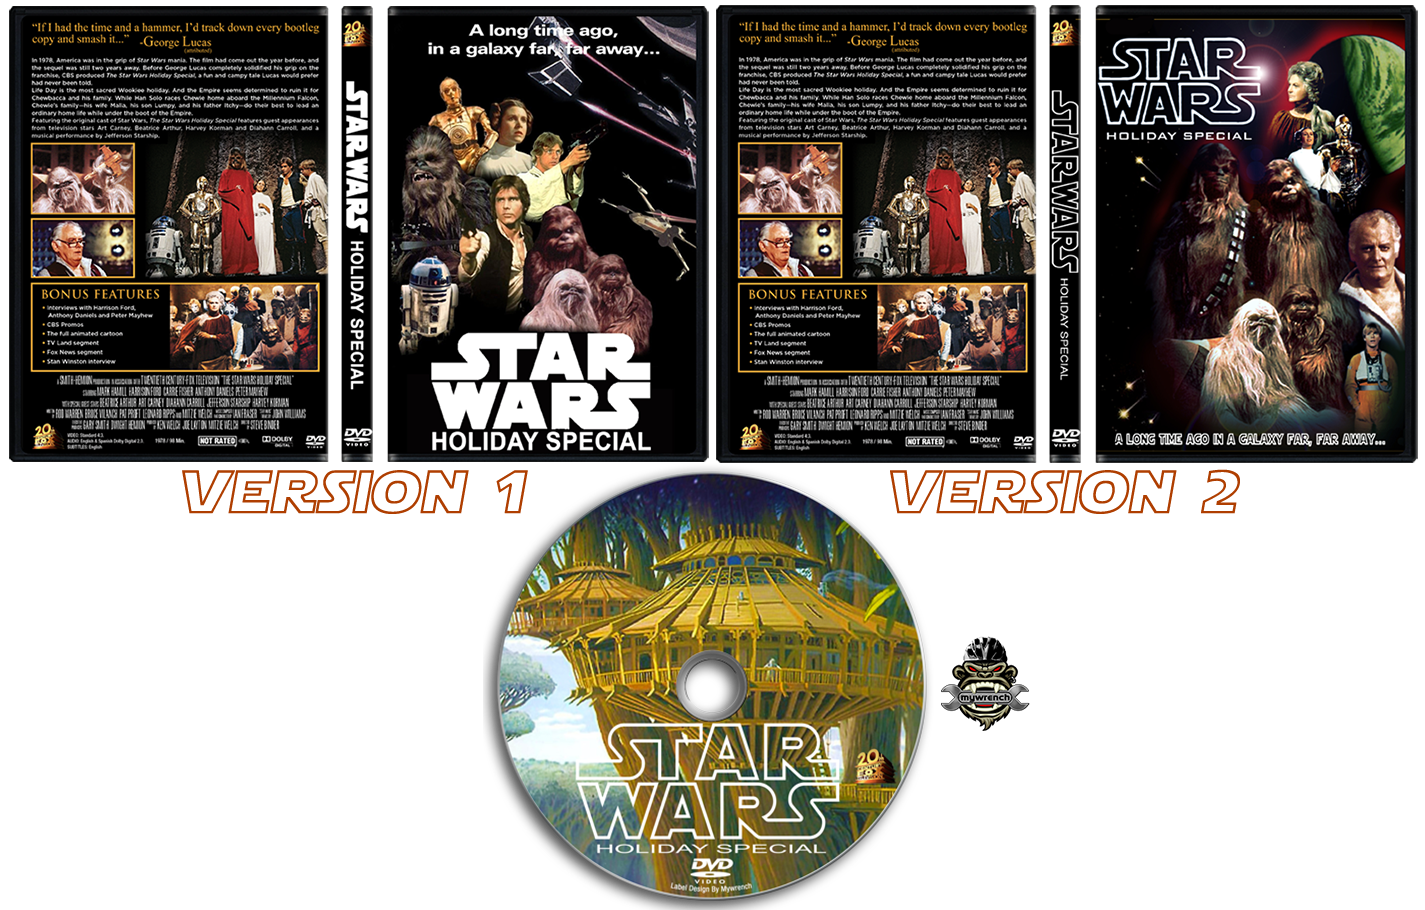 Star Wars Holiday Special DVD Showcase.png